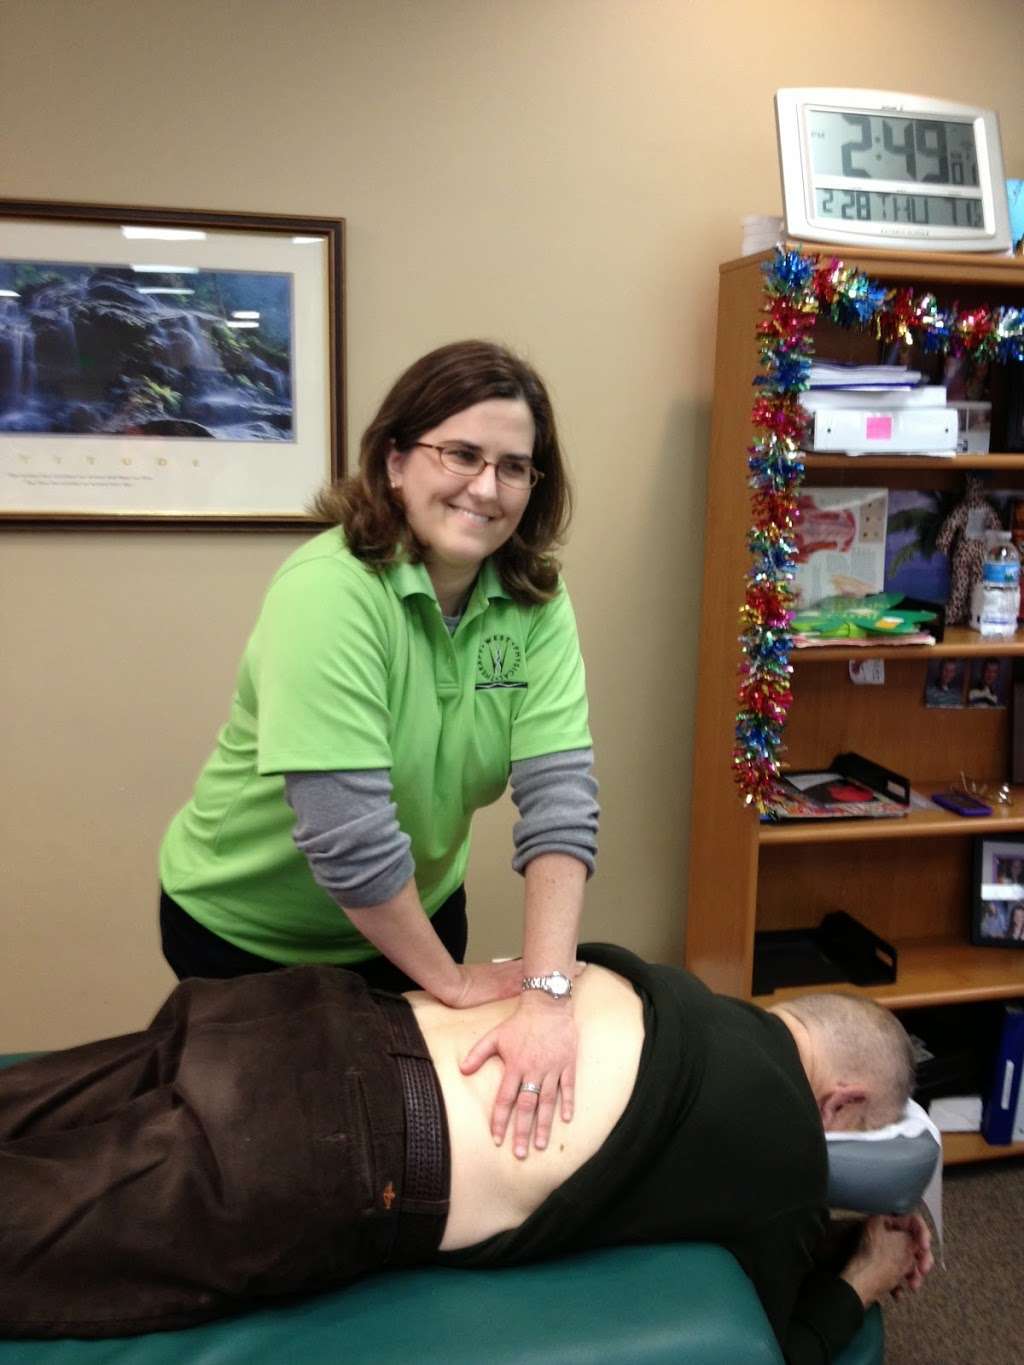 West Physical Therapy, PC | 38 S Main St, Sugar Grove, IL 60554, USA | Phone: (630) 466-5866